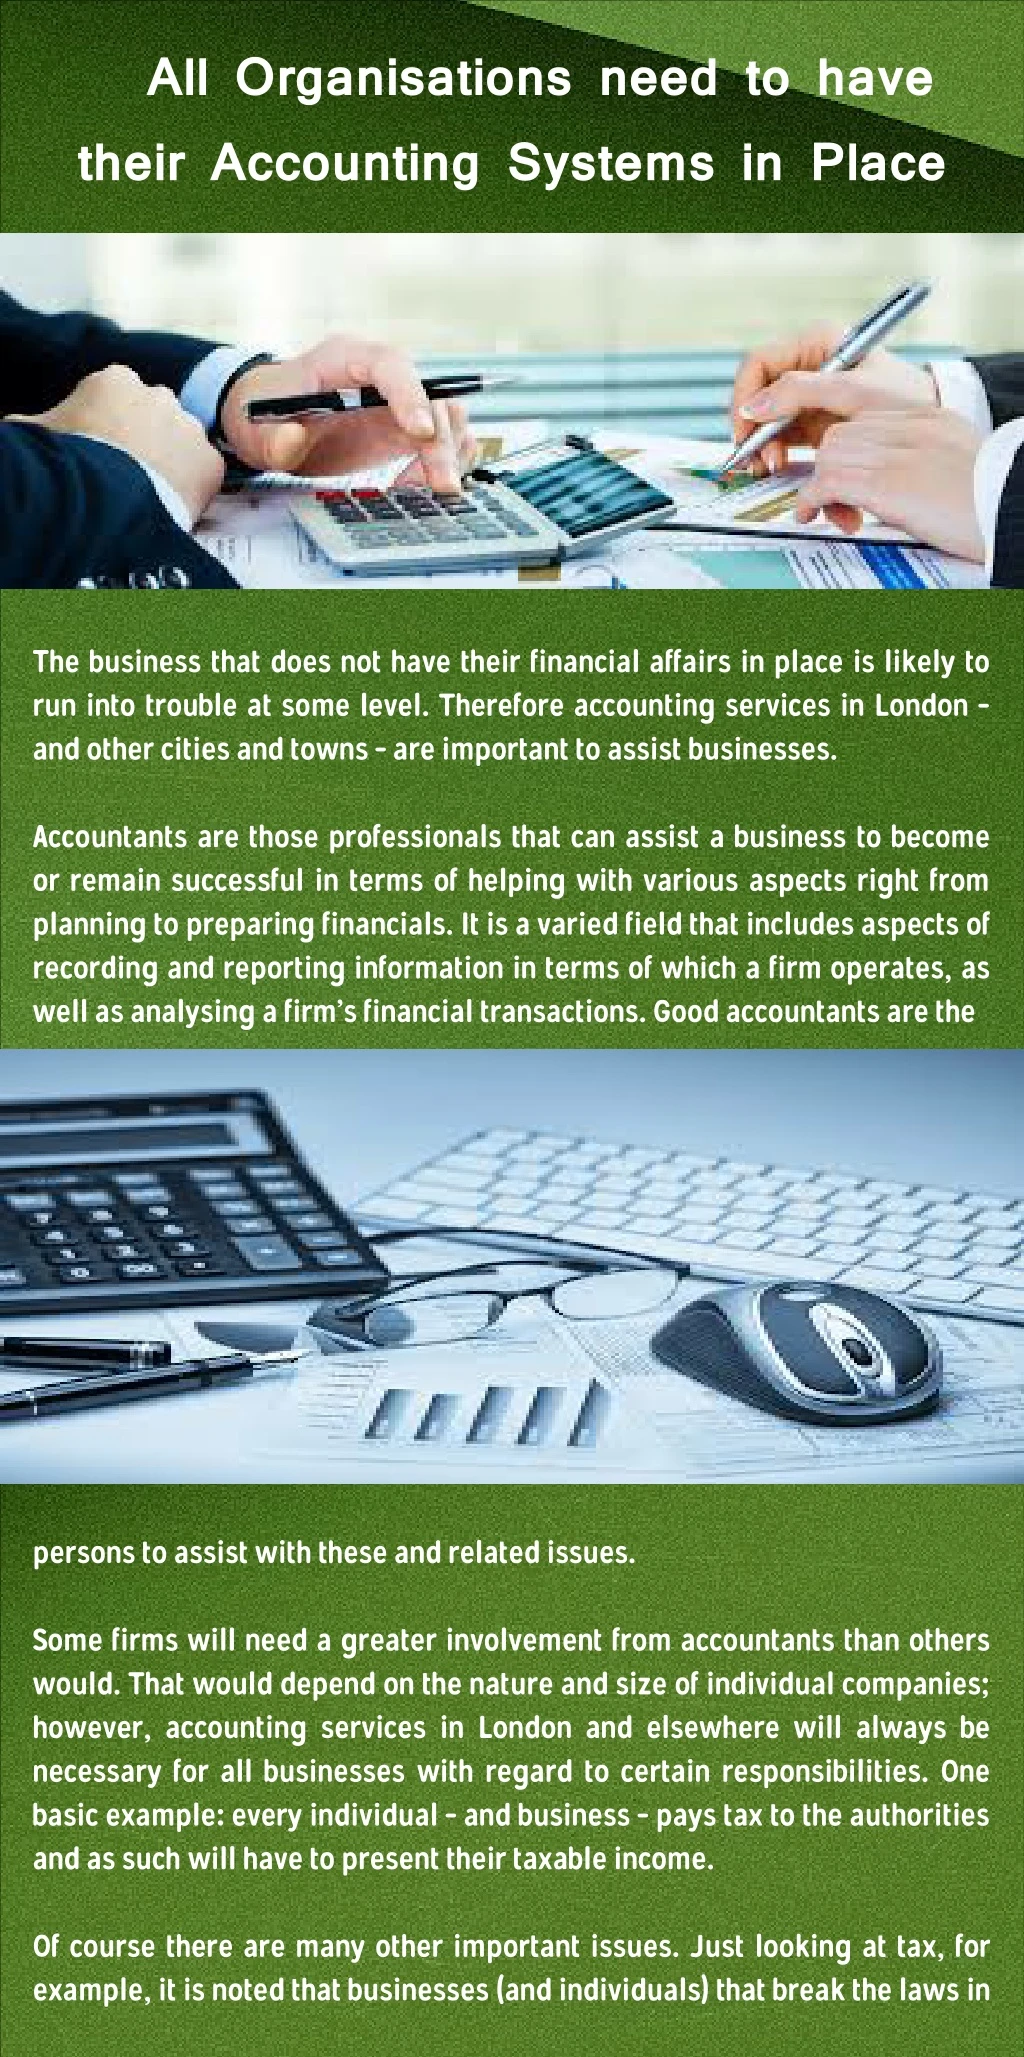 all organisations need to have their accounting